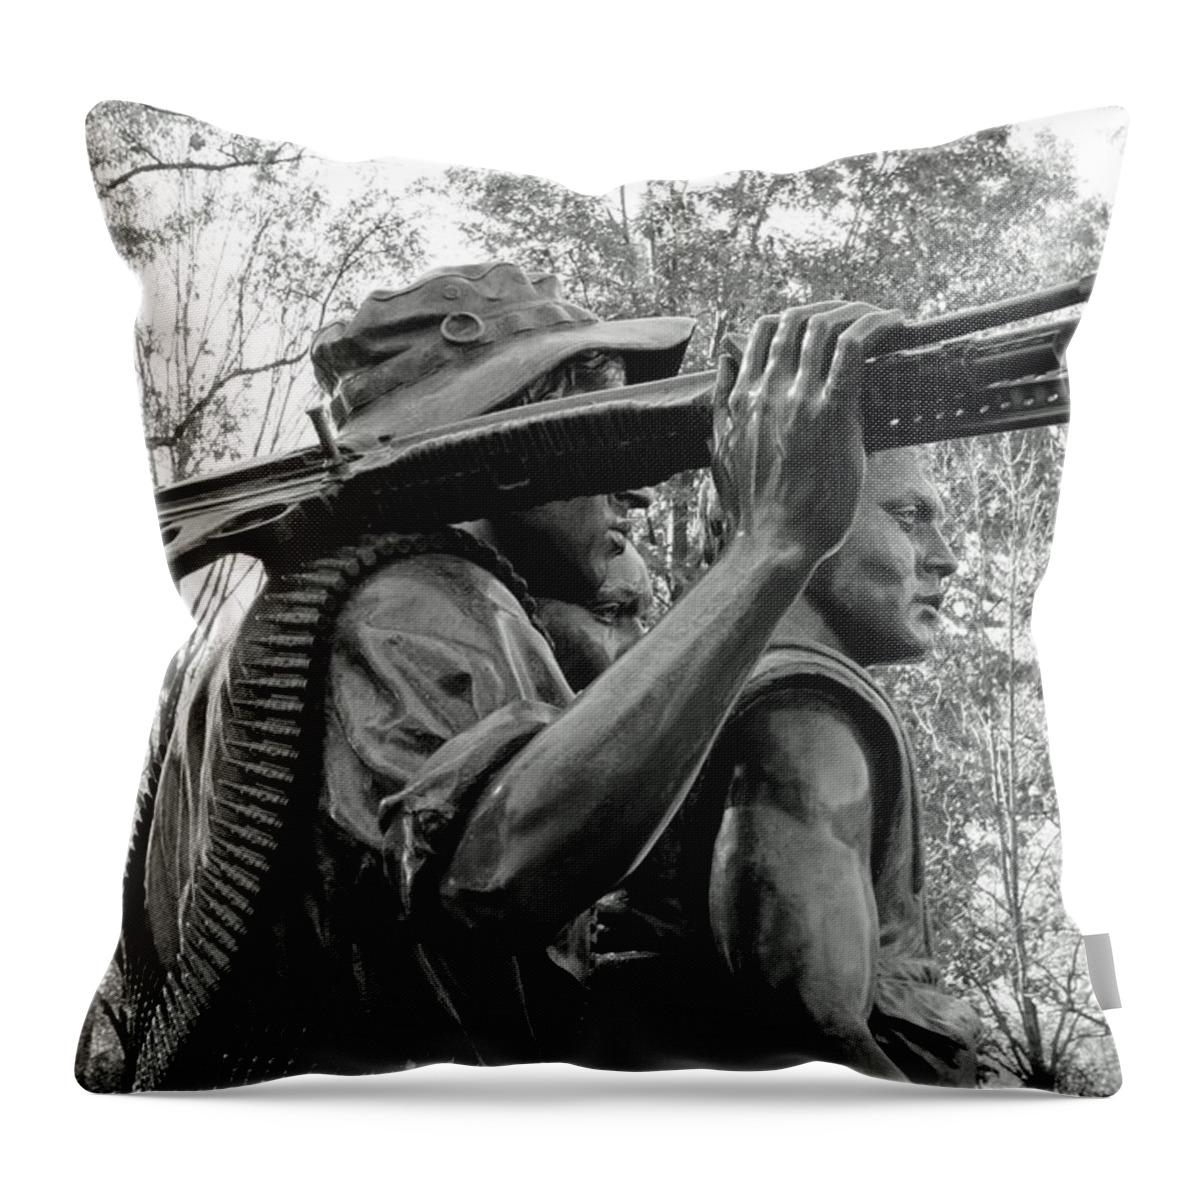 Three Throw Pillow featuring the photograph Three Soldiers In Vietnam by Cora Wandel